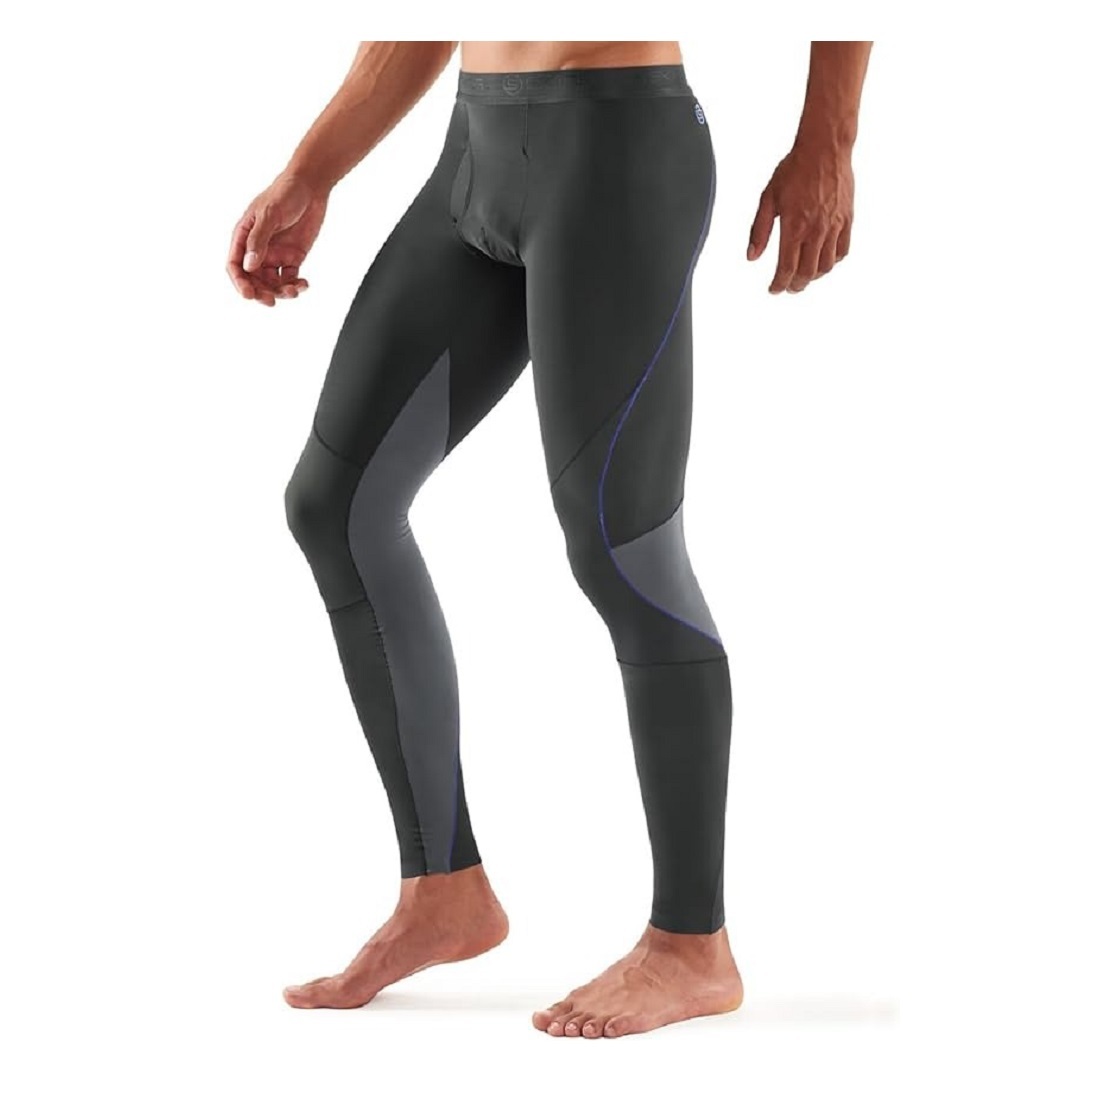  Skins Women's RY400 Compression Recovery Tights